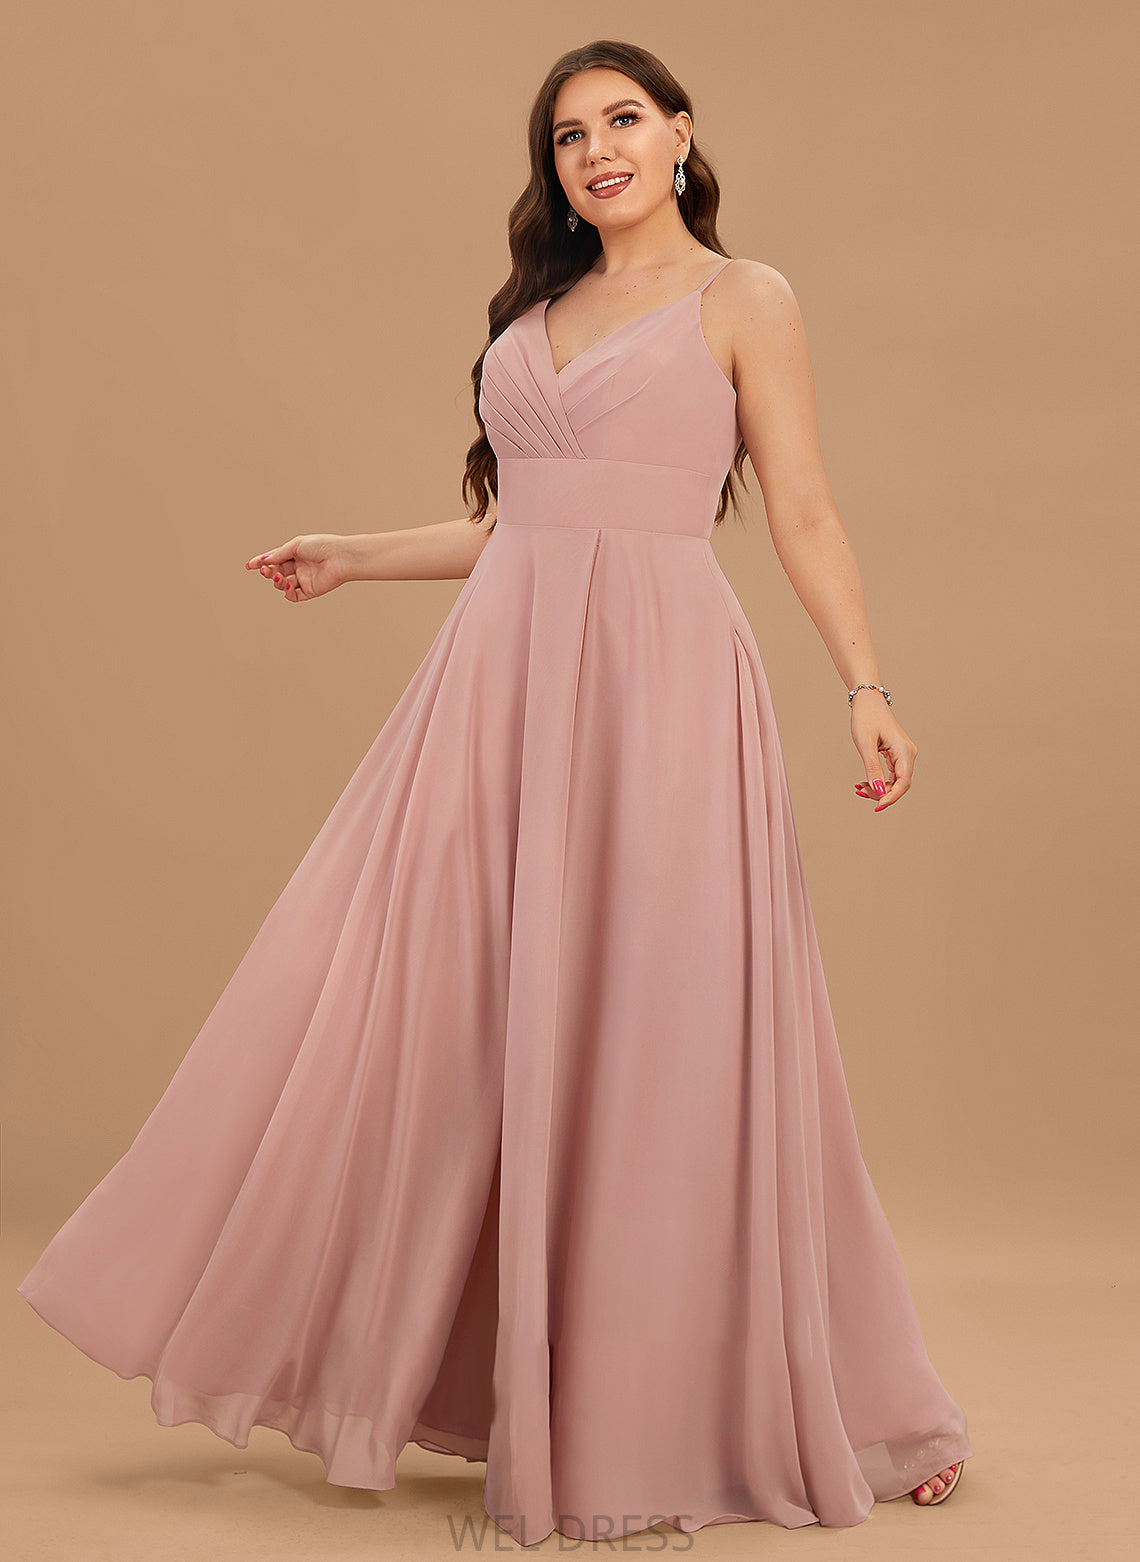 Ruffle Pockets A-Line Prom Dresses Floor-Length Chiffon V-neck Kayleigh With